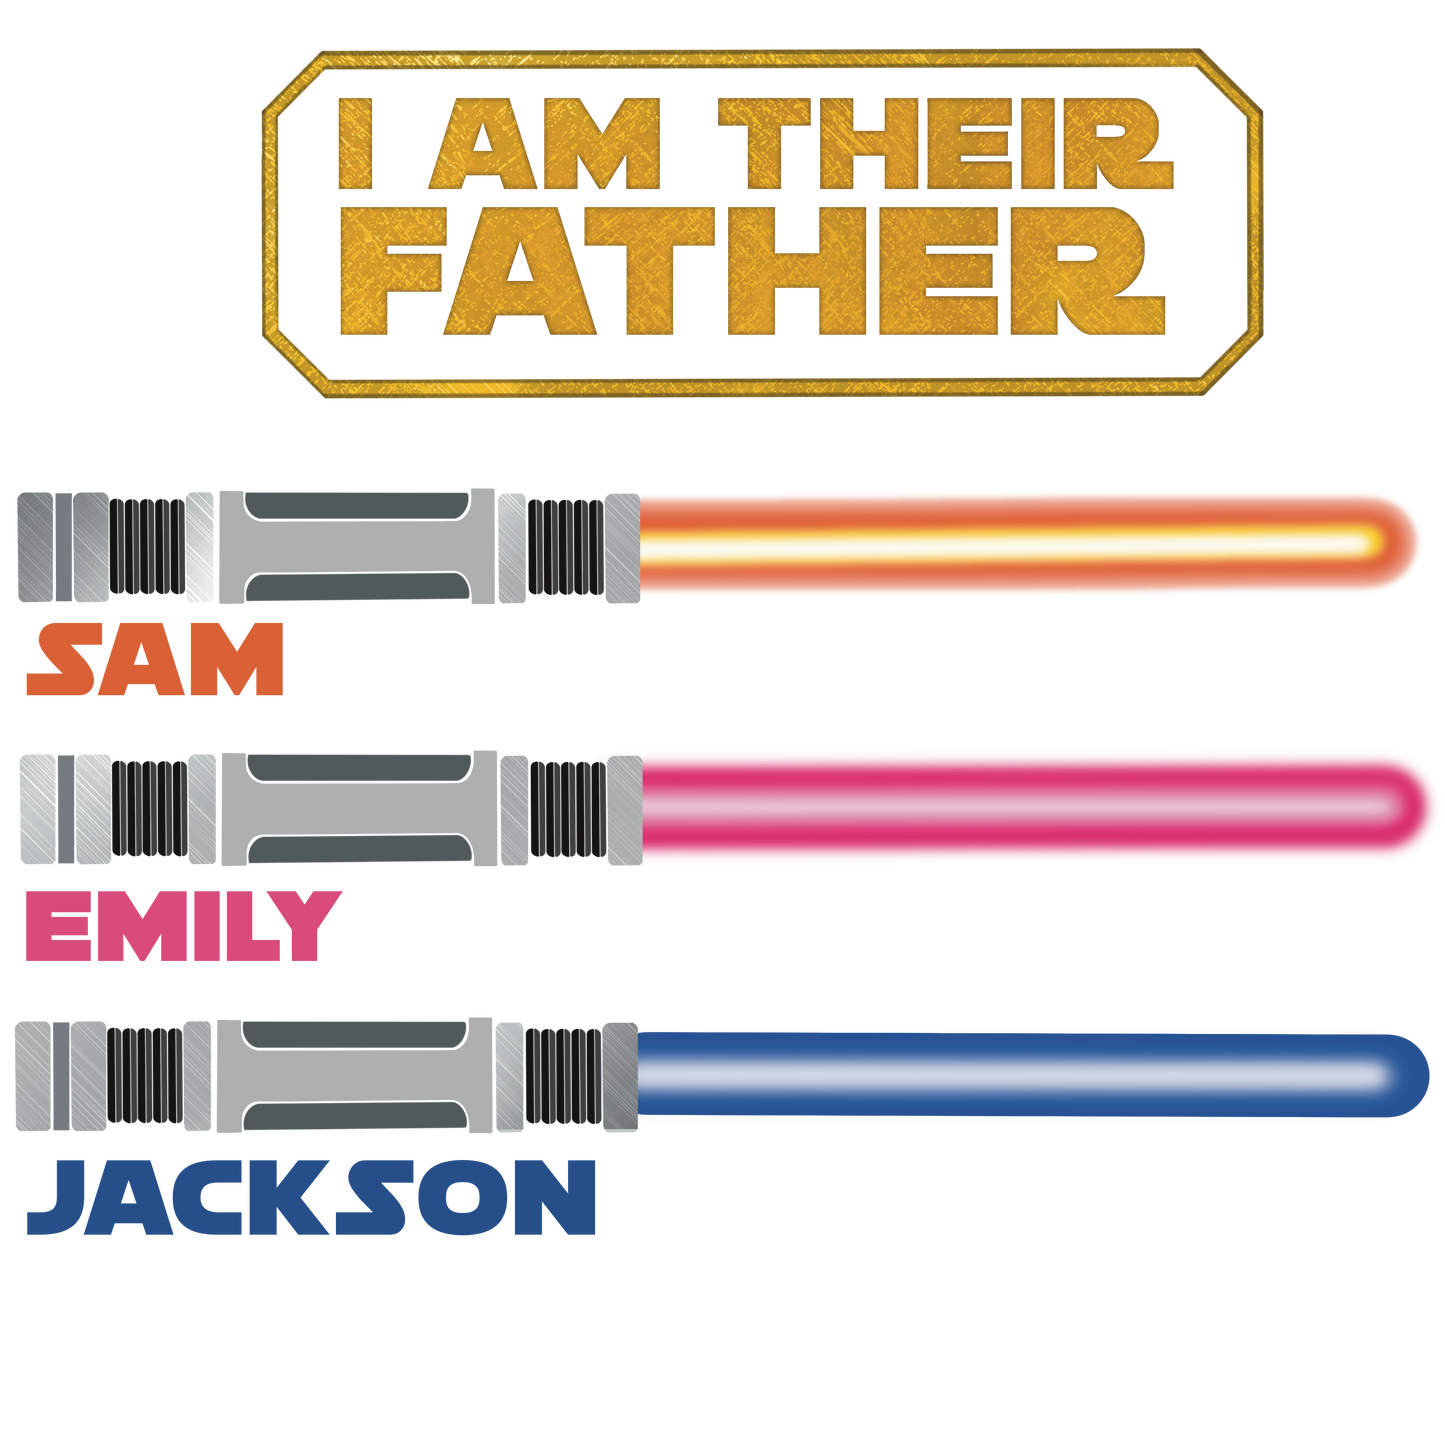 I am their father star wars inspired custom light saber t-shirt for father's day